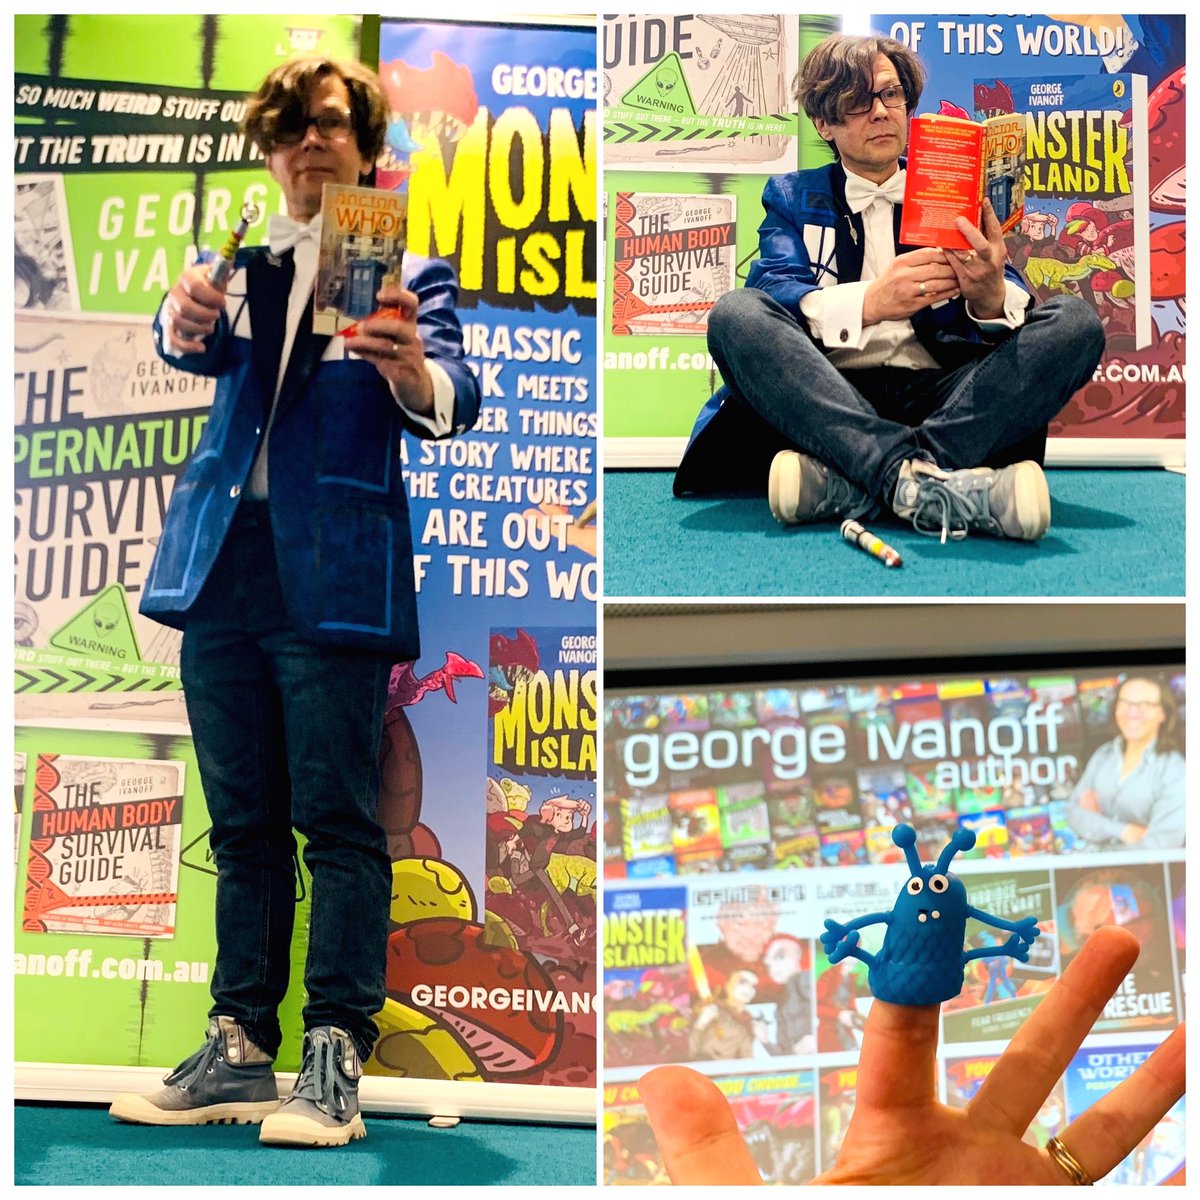 Fun day with Year 7s at Clyde Sec College today. It was Book Week dress-up day, so I wore my TARDIS jacket and brought along a DOCTOR WHO book. One of the Year 8s, who I would have presented to last year, gave me a finger puppet and asked if I could use it in my presentations. 😂